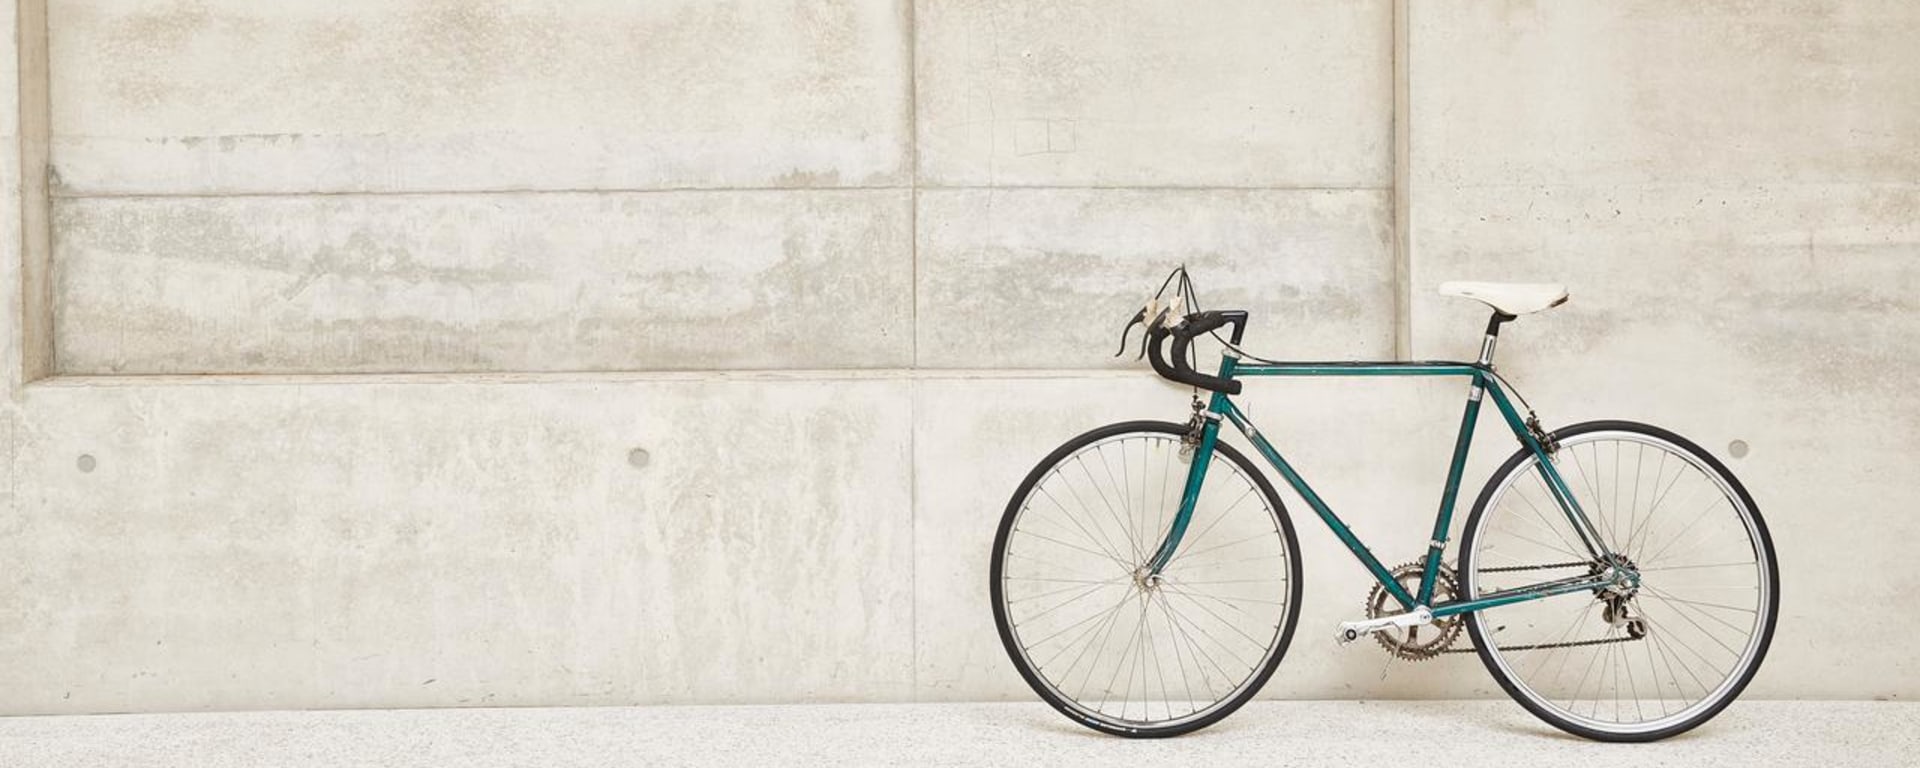 A green racing bike leaning against a concrete wall